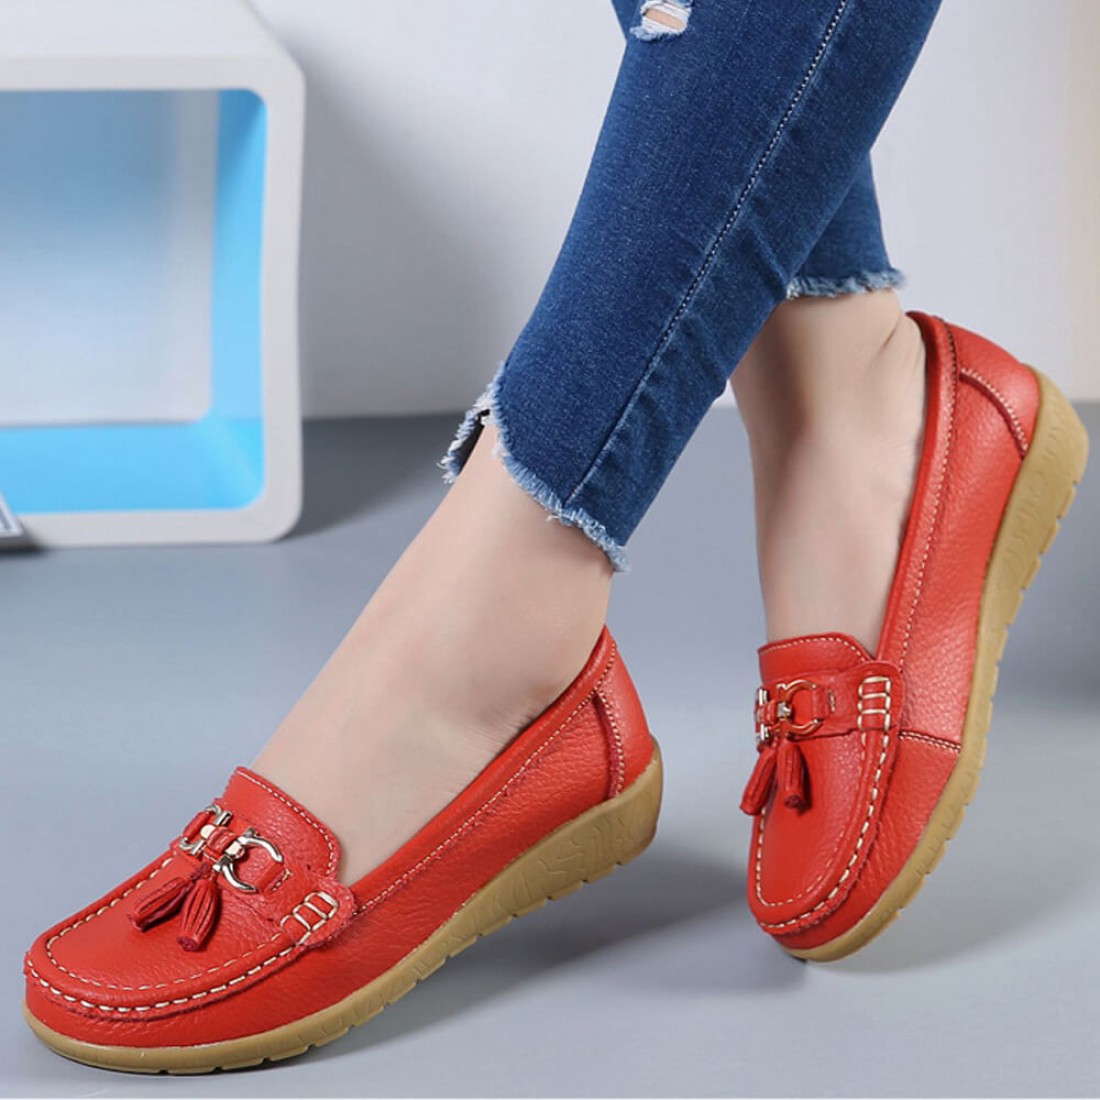 Buy Soft Leather with Rubber Sole Slip On Loafer Flats -Red | Look ...